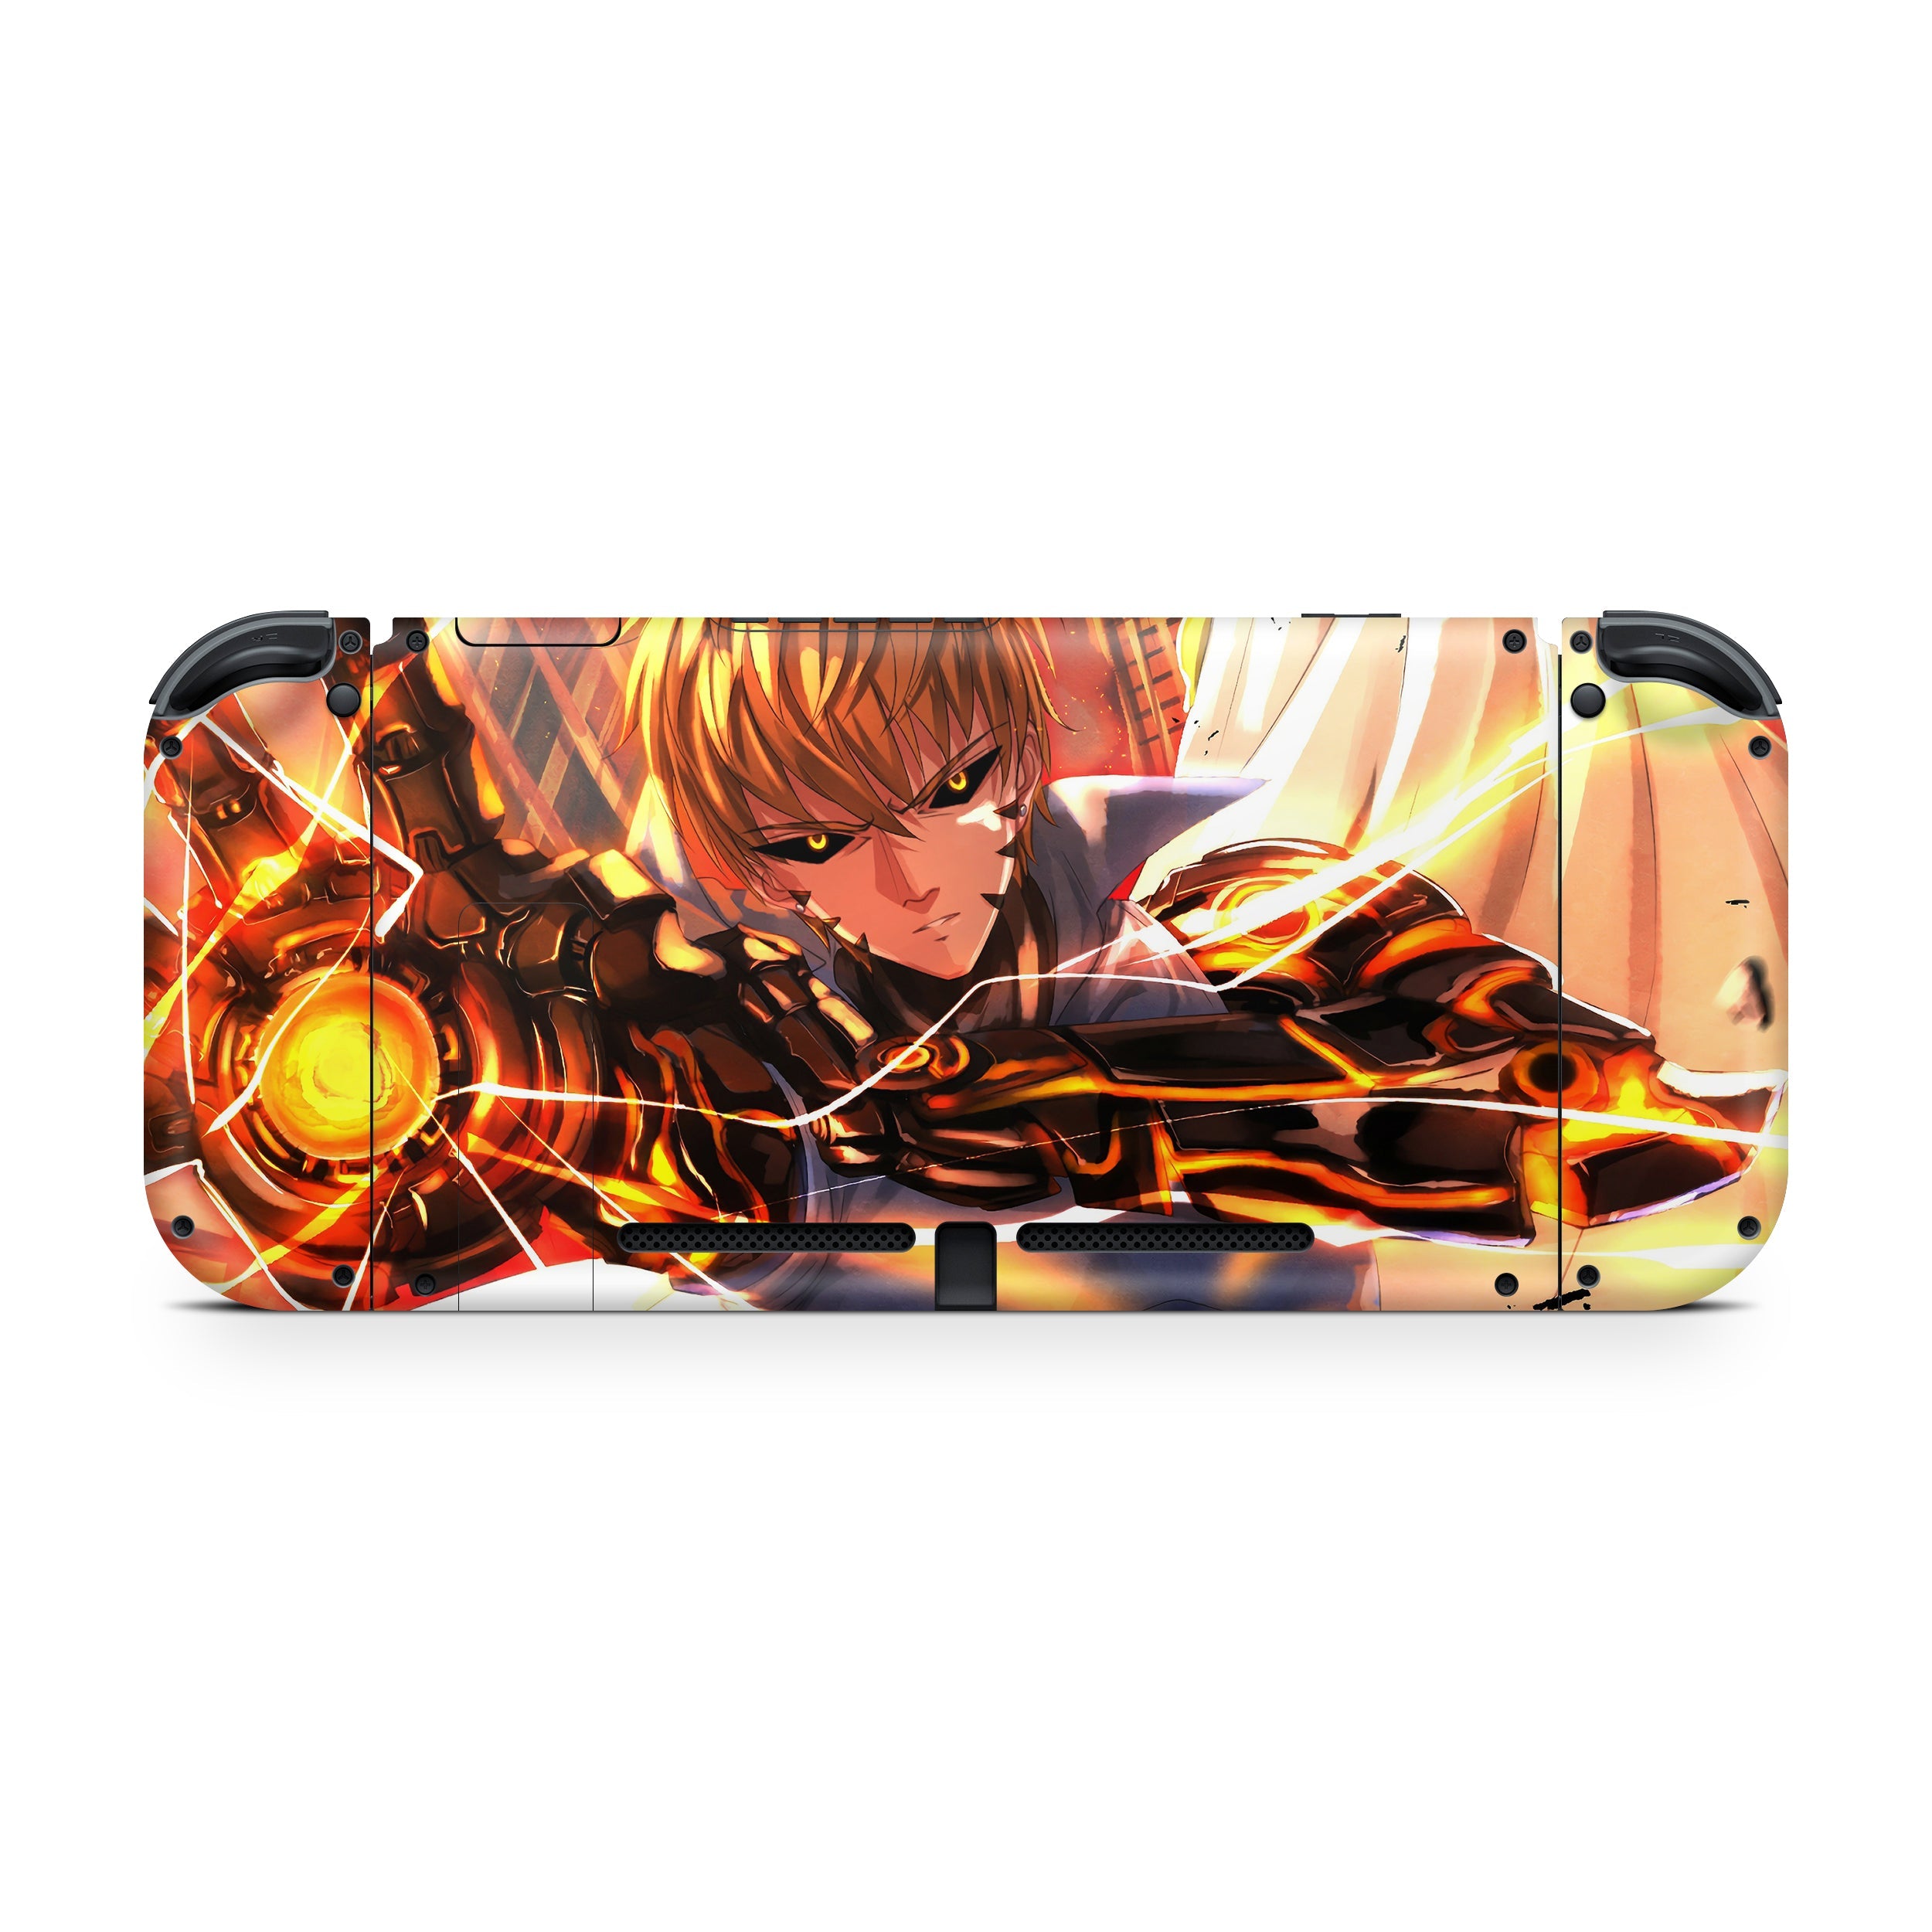 A video game skin featuring a One Punch Man Genos design for the Nintendo Switch.